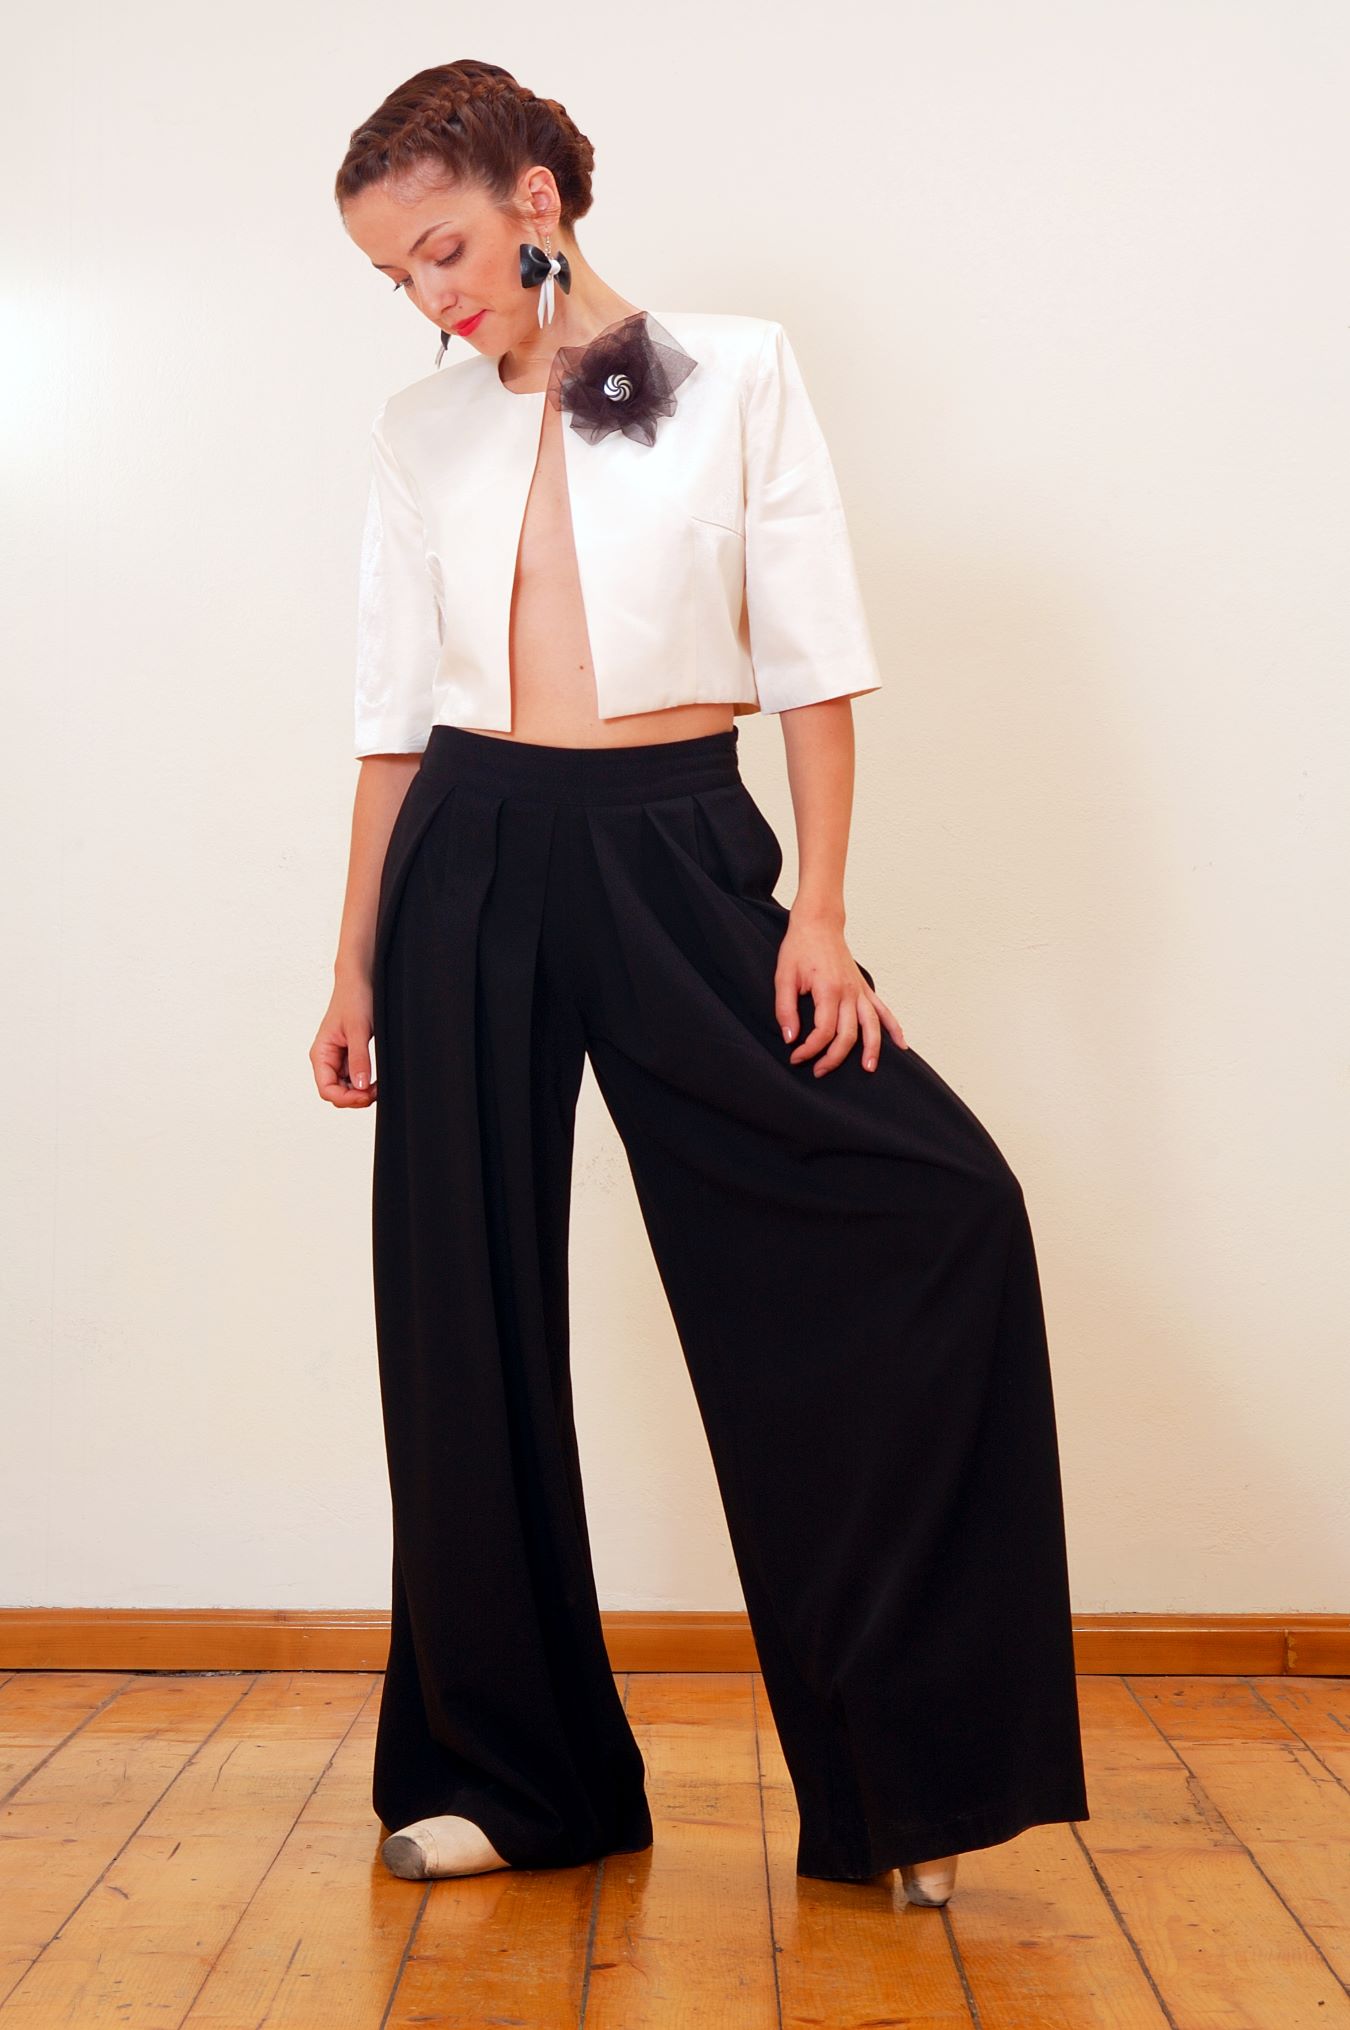 Everyone loves this woman's black wide-leg pants because it embodies a woman's free spirit and grace.